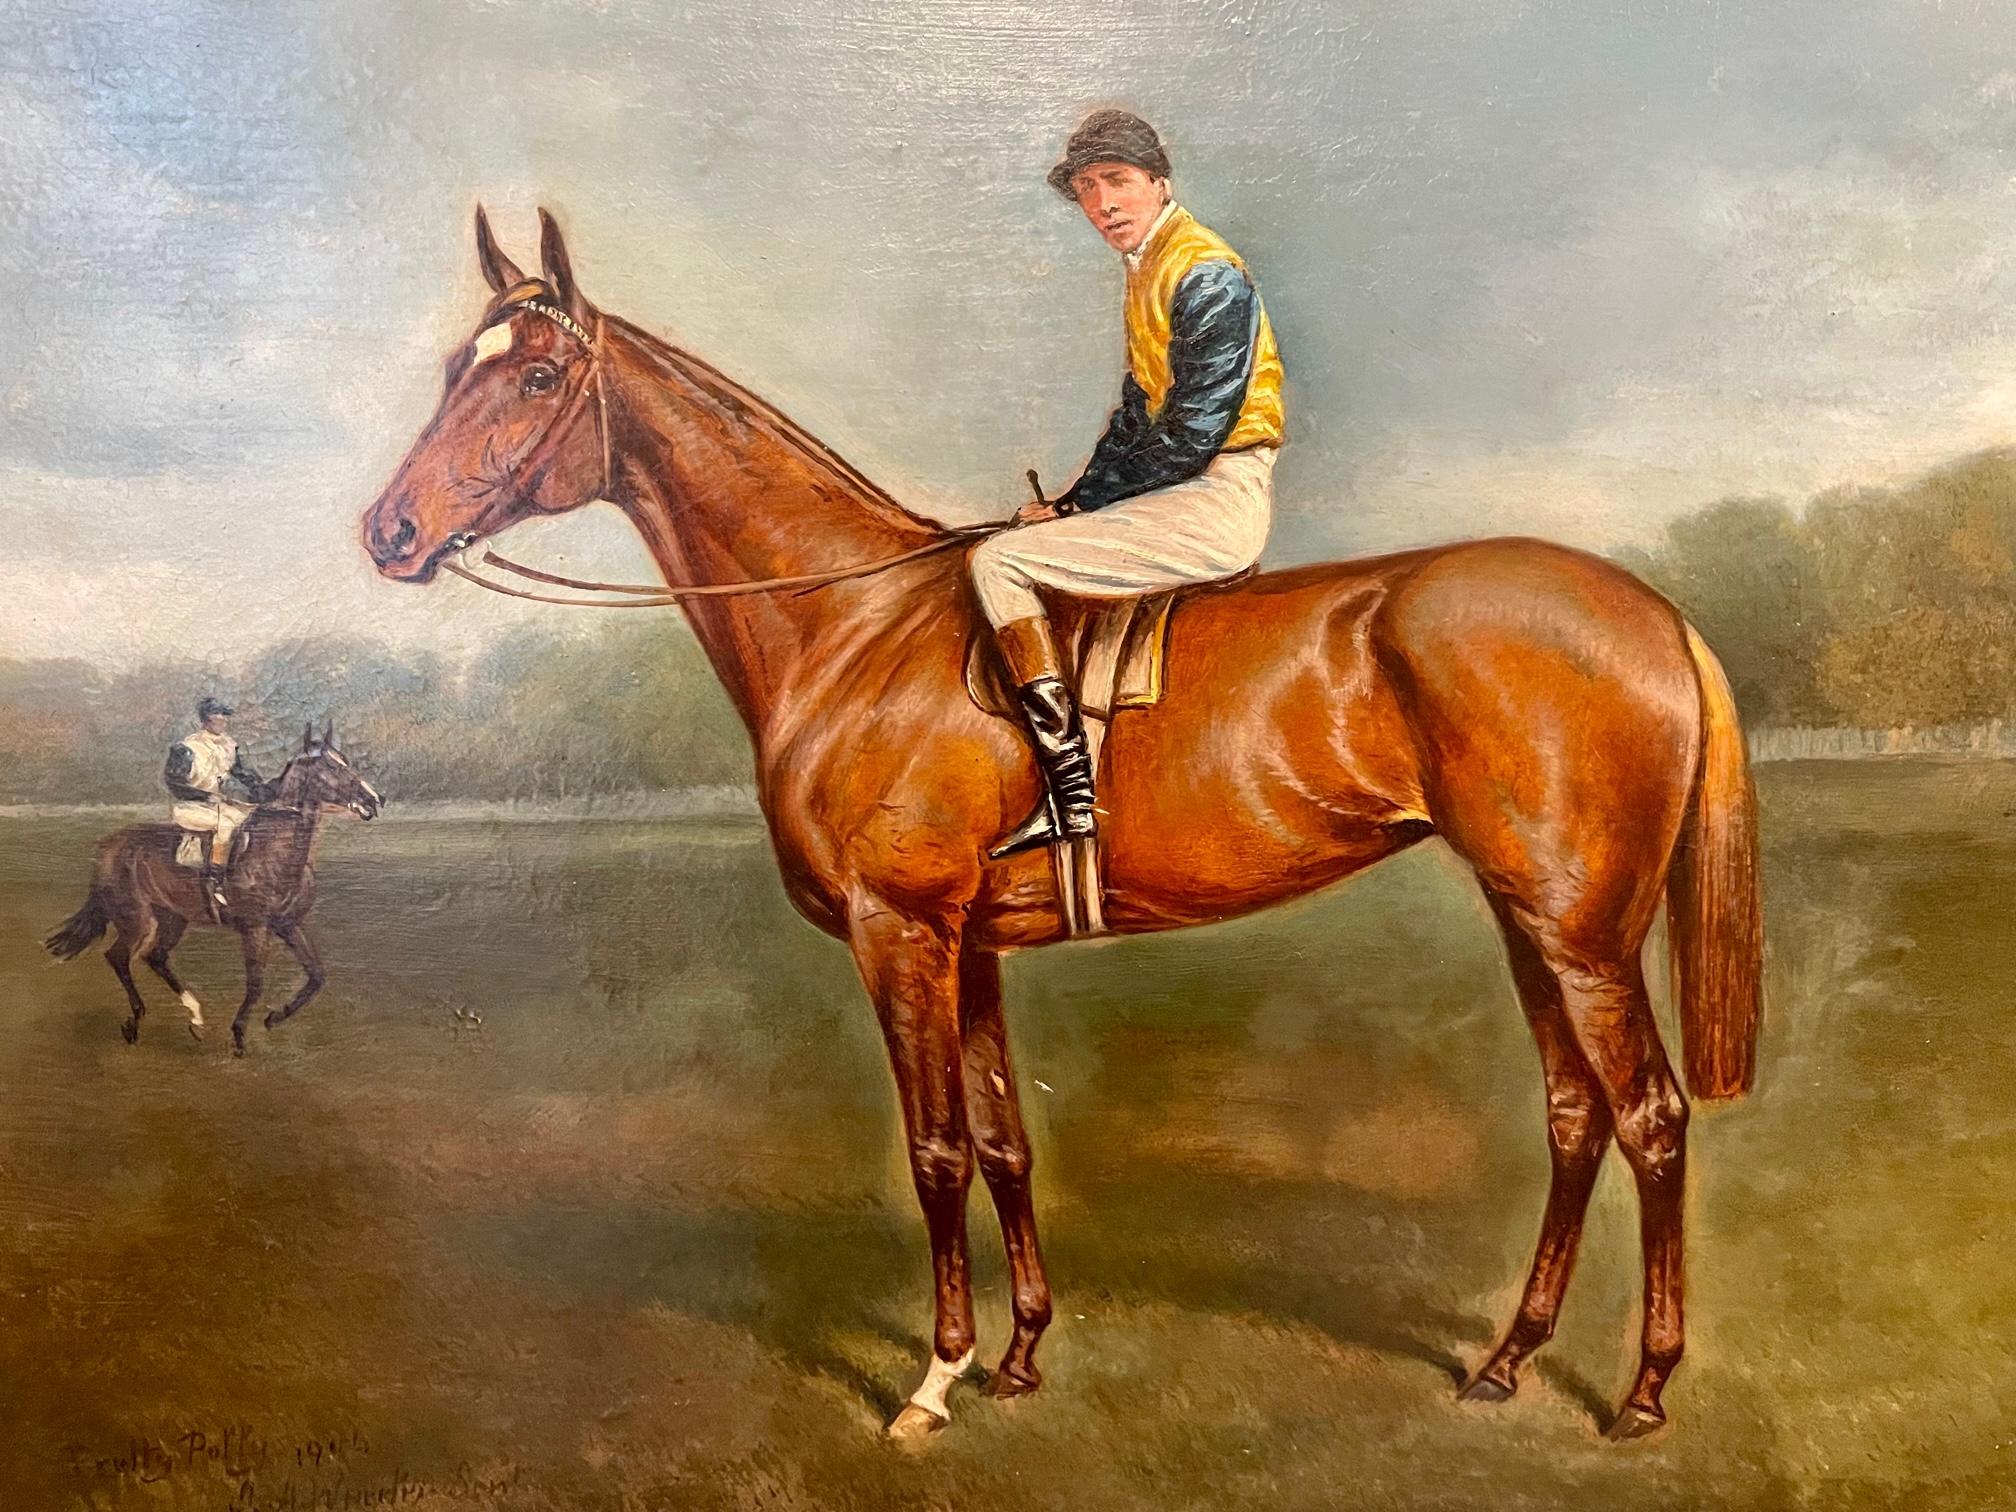 Alfred Wheeler (1852-1932) Oil on Panel of the Brilliant Racehorse Pretty Polly. Signed and Dated 1906 with Jockey Danny Maher up and Trained by R Gilpin and Owner Major Eustace Loder.

Alfred Wheeler was born near Bath in Somerset to John Alfred